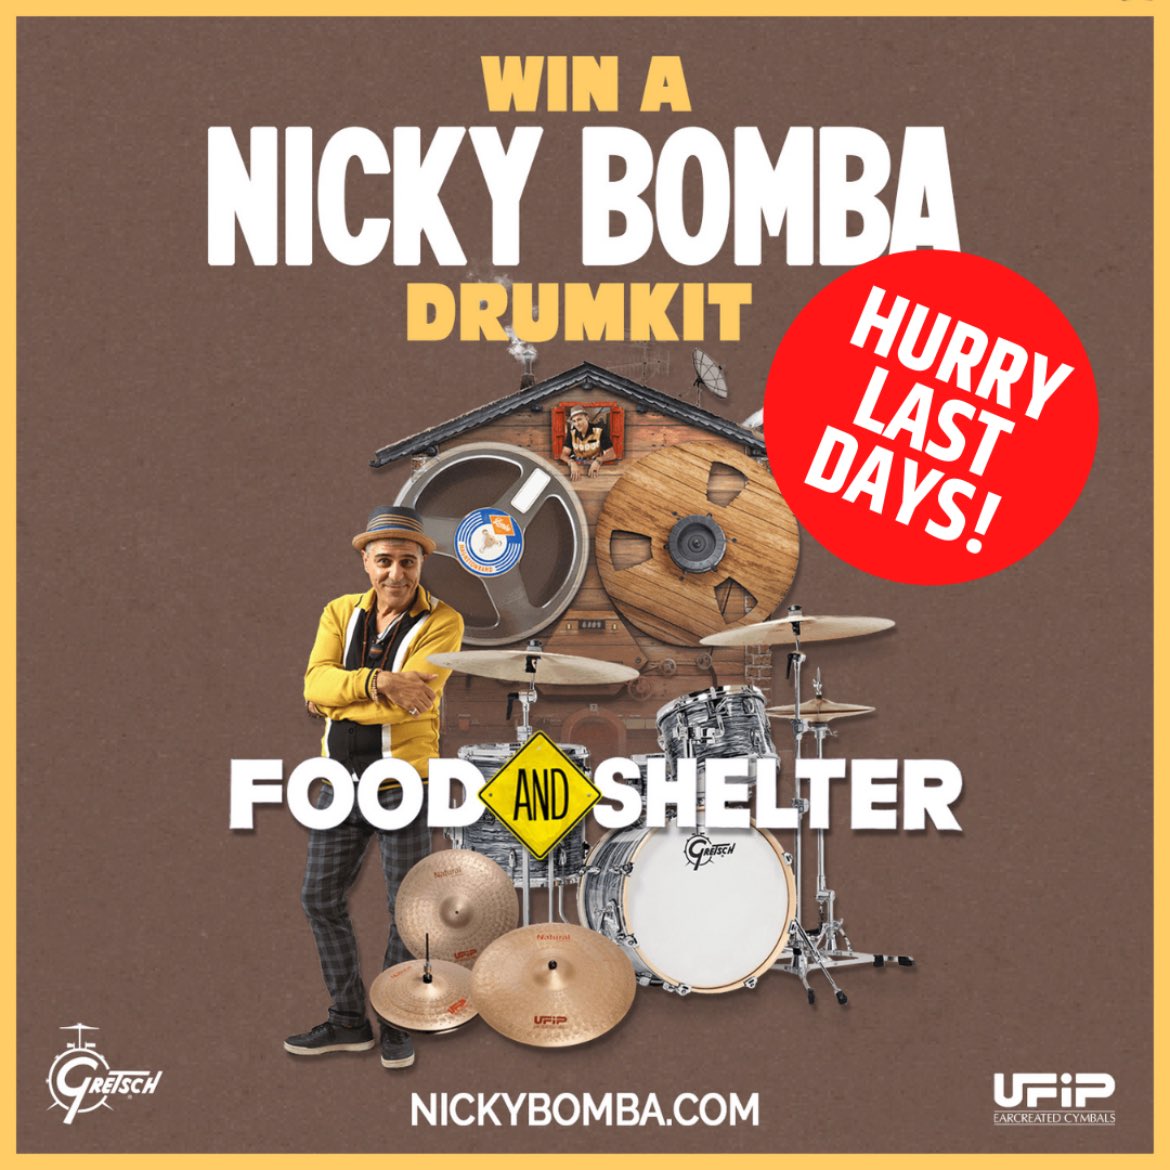 Last days to win a drum kit! Comp closes midnight Thursday AEDT Details and entry here >>> nickybomba.com